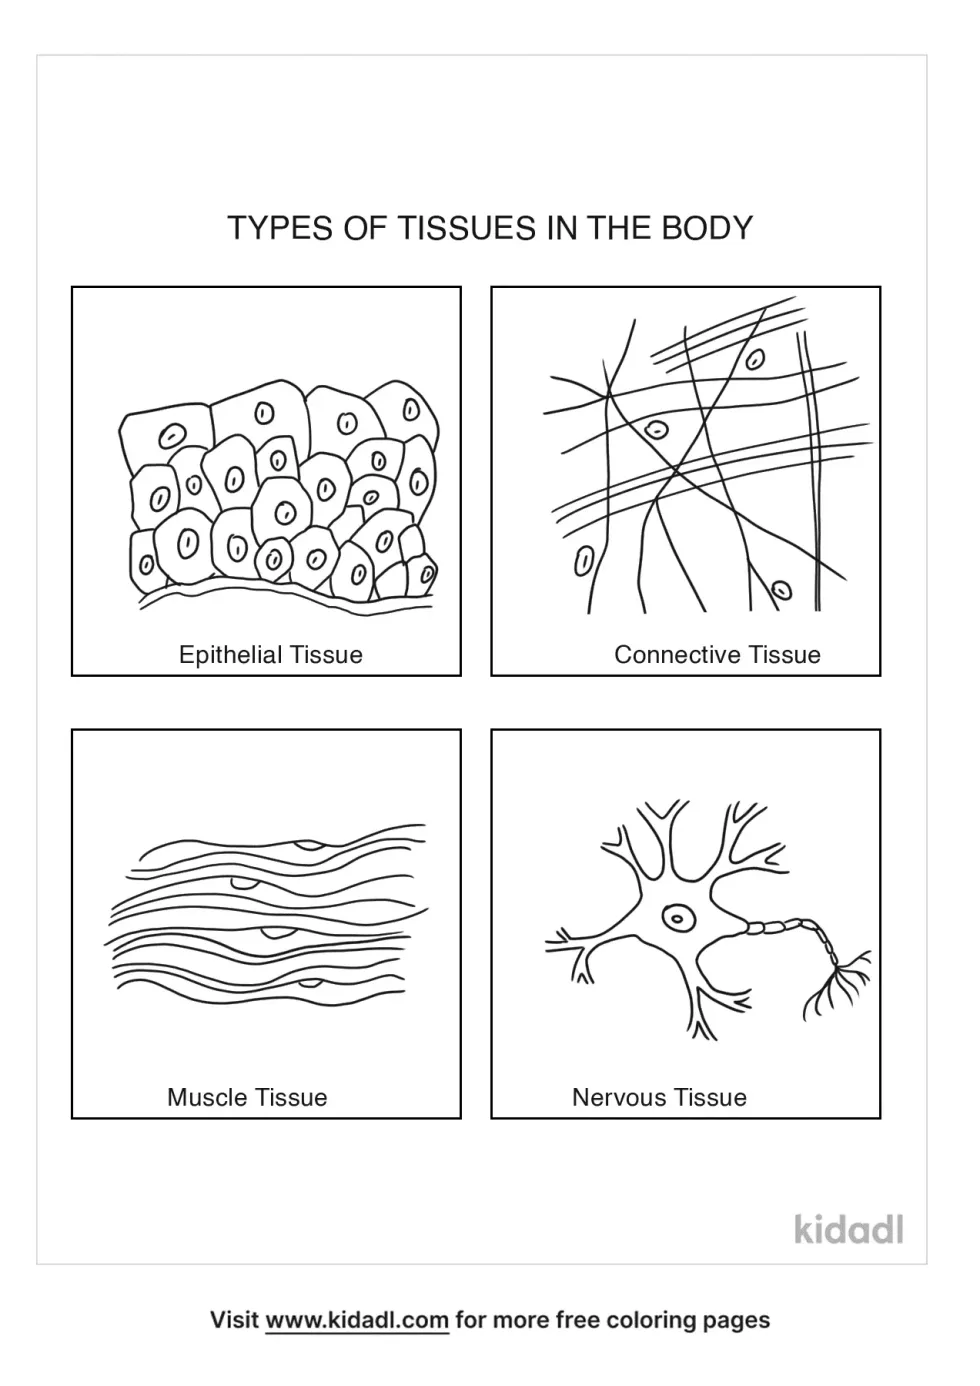 4 Types Tissues In The Body